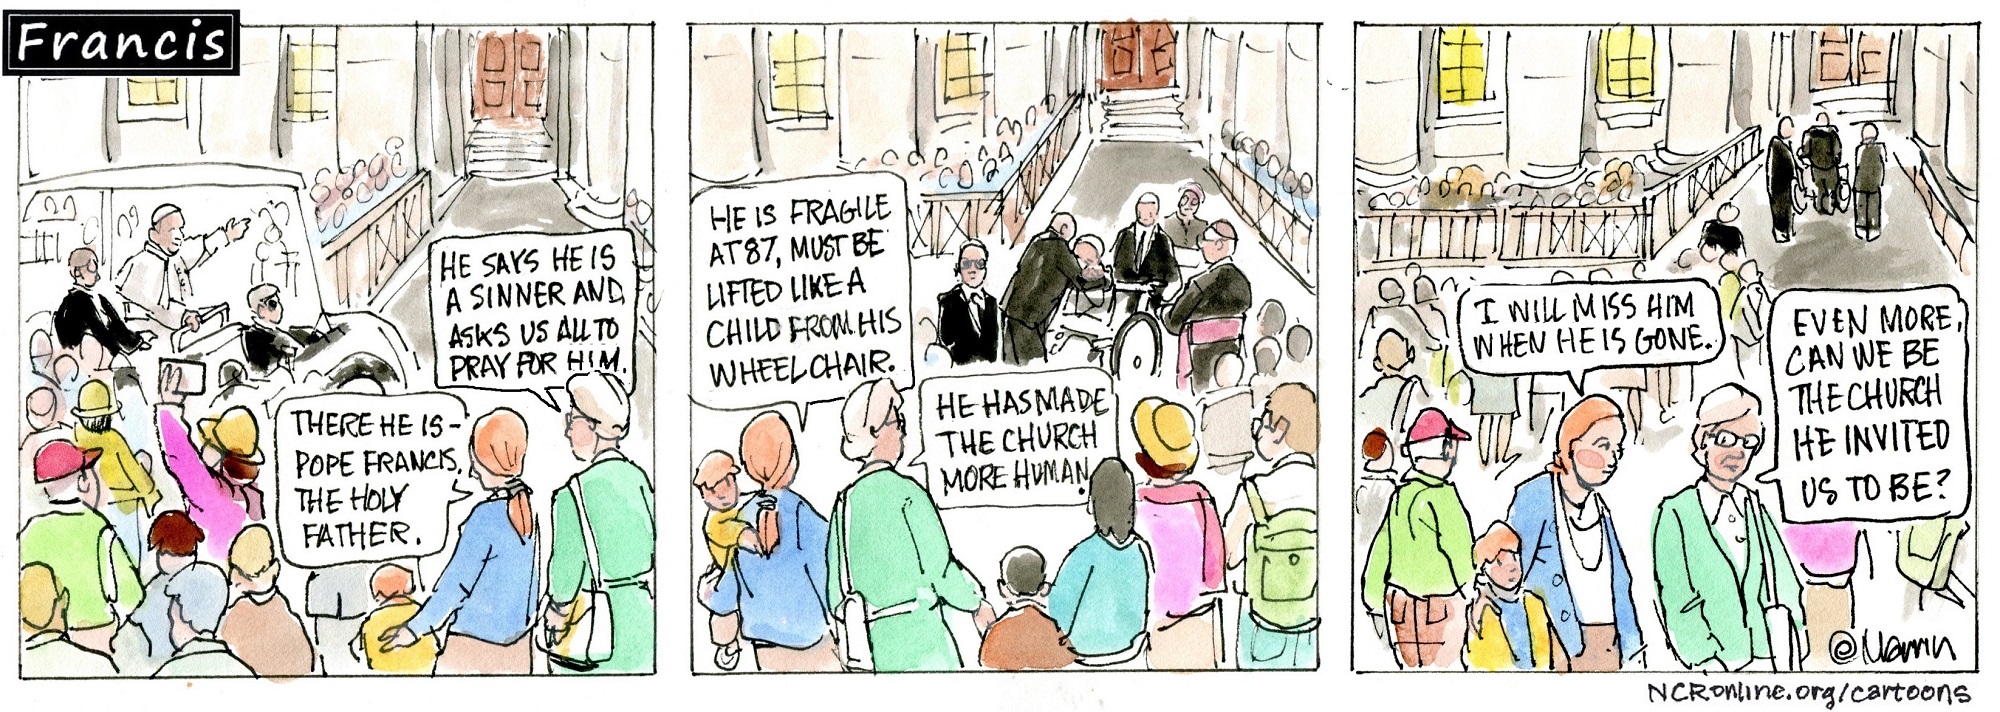 Francis, the comic strip: A few of Francis' admirers talk about the future of the Catholic Church.